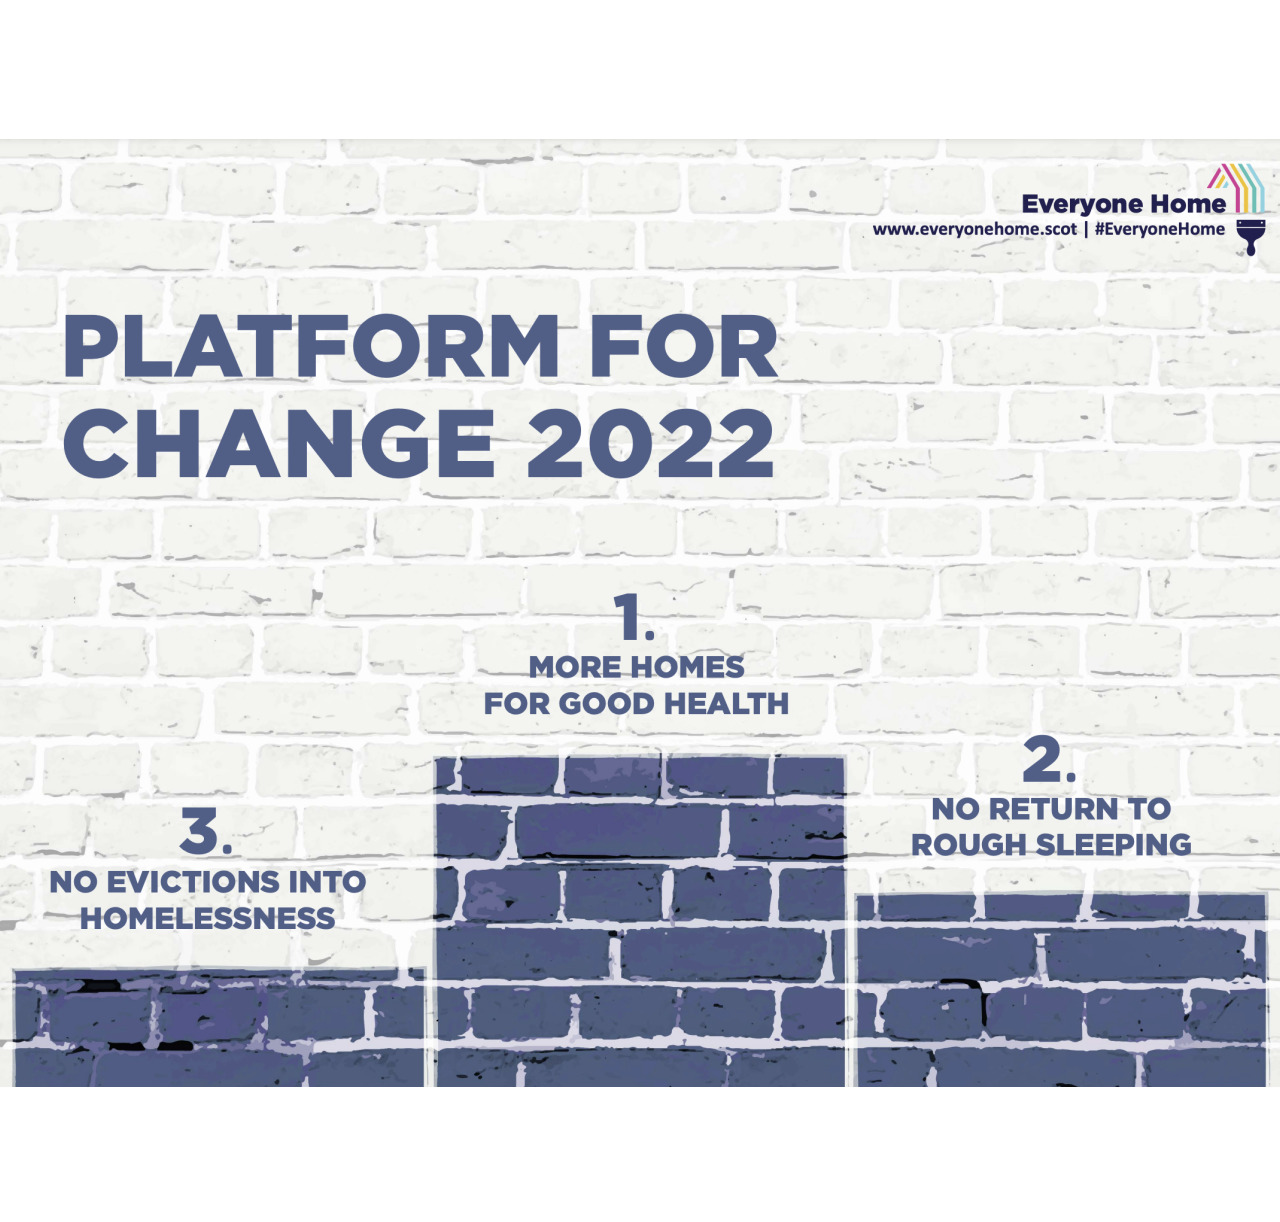 Everyone's Home Platform for Change